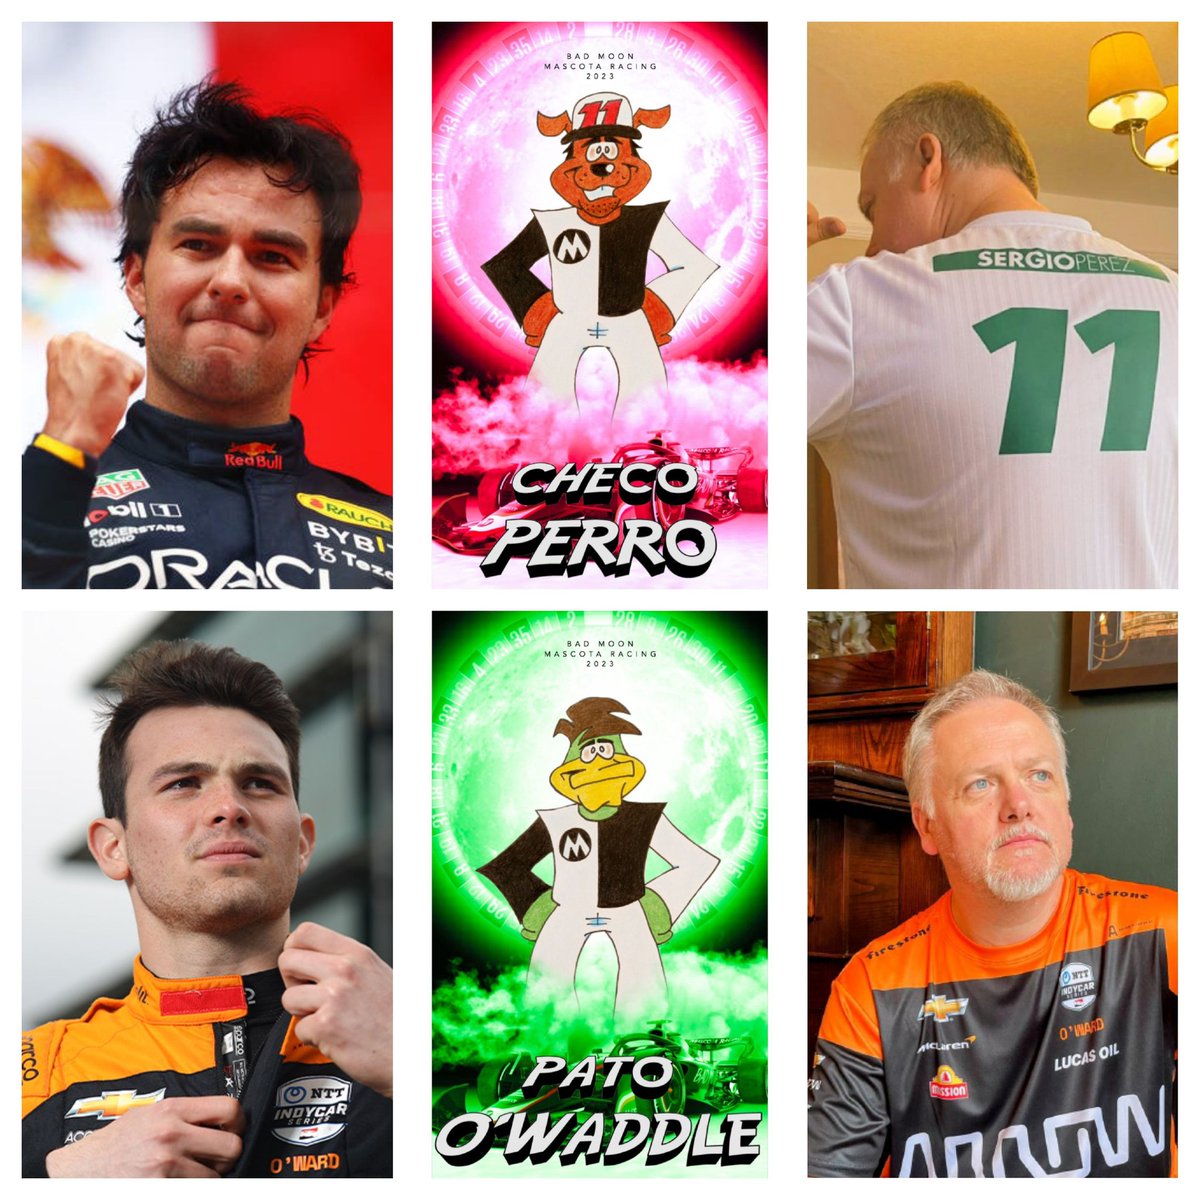 Difficult races await for both @SChecoPerez and @PatricioOWard today, but you can rest assured that Mascota Racing will be with them every turn of the track. 👊

Just go out and do your best, guys!
🐶🦆🇲🇽

#AustrianGP #Honda200